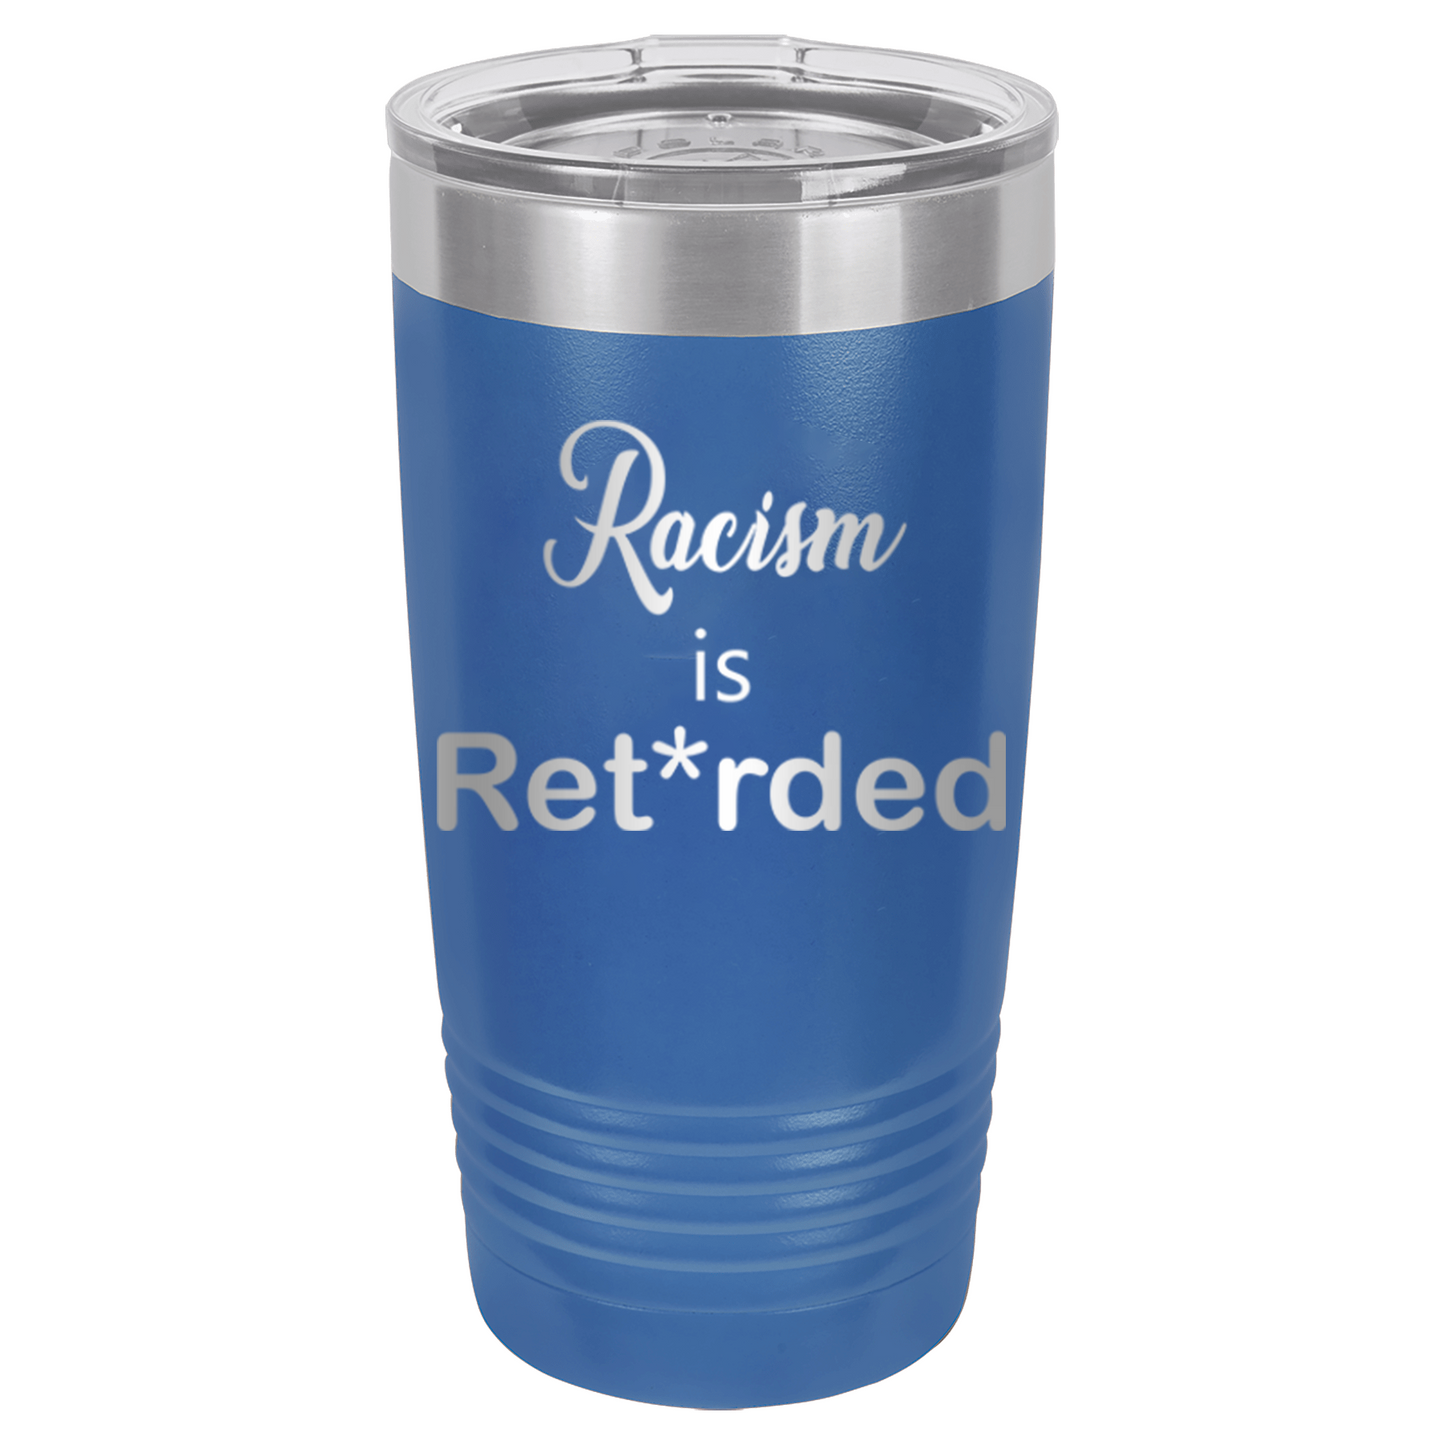 Racism is Ret*rded Insulated Tumbler